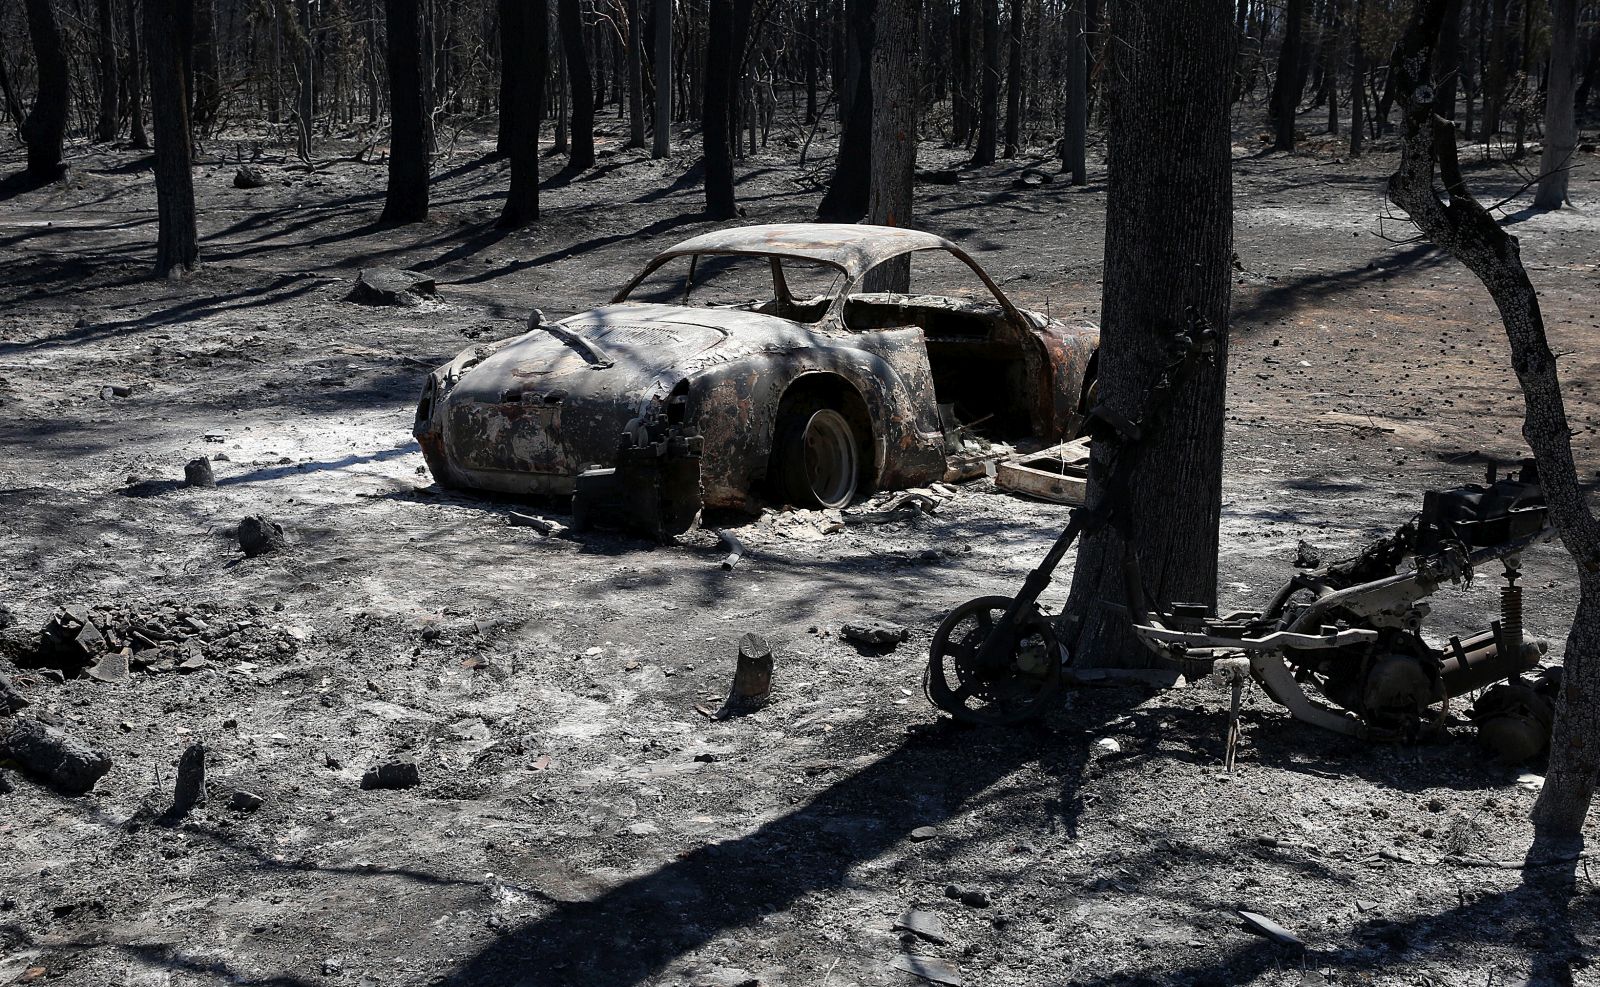 epa09406231 A burnt car is seen in the forest  in Varybobi area, near Athens, Greece, 08 August 2021. Fires that broke out in Attica and Evia island this week have burned more than a quarter of a million stremmas, the National Observatory of Athens' center Beyond said on August 08. Some 76,150 stremmas (7,615 hectares) have been burnt so far in northern Attica. At Evia island the surface area of burnt land is measured at 197,940 stremmas (19,794 hectares). These figures concern only the fires in Attica and Evia, but dozens of large fires have affected several areas across the country.  EPA/ORESTIS PANAGIOTOU